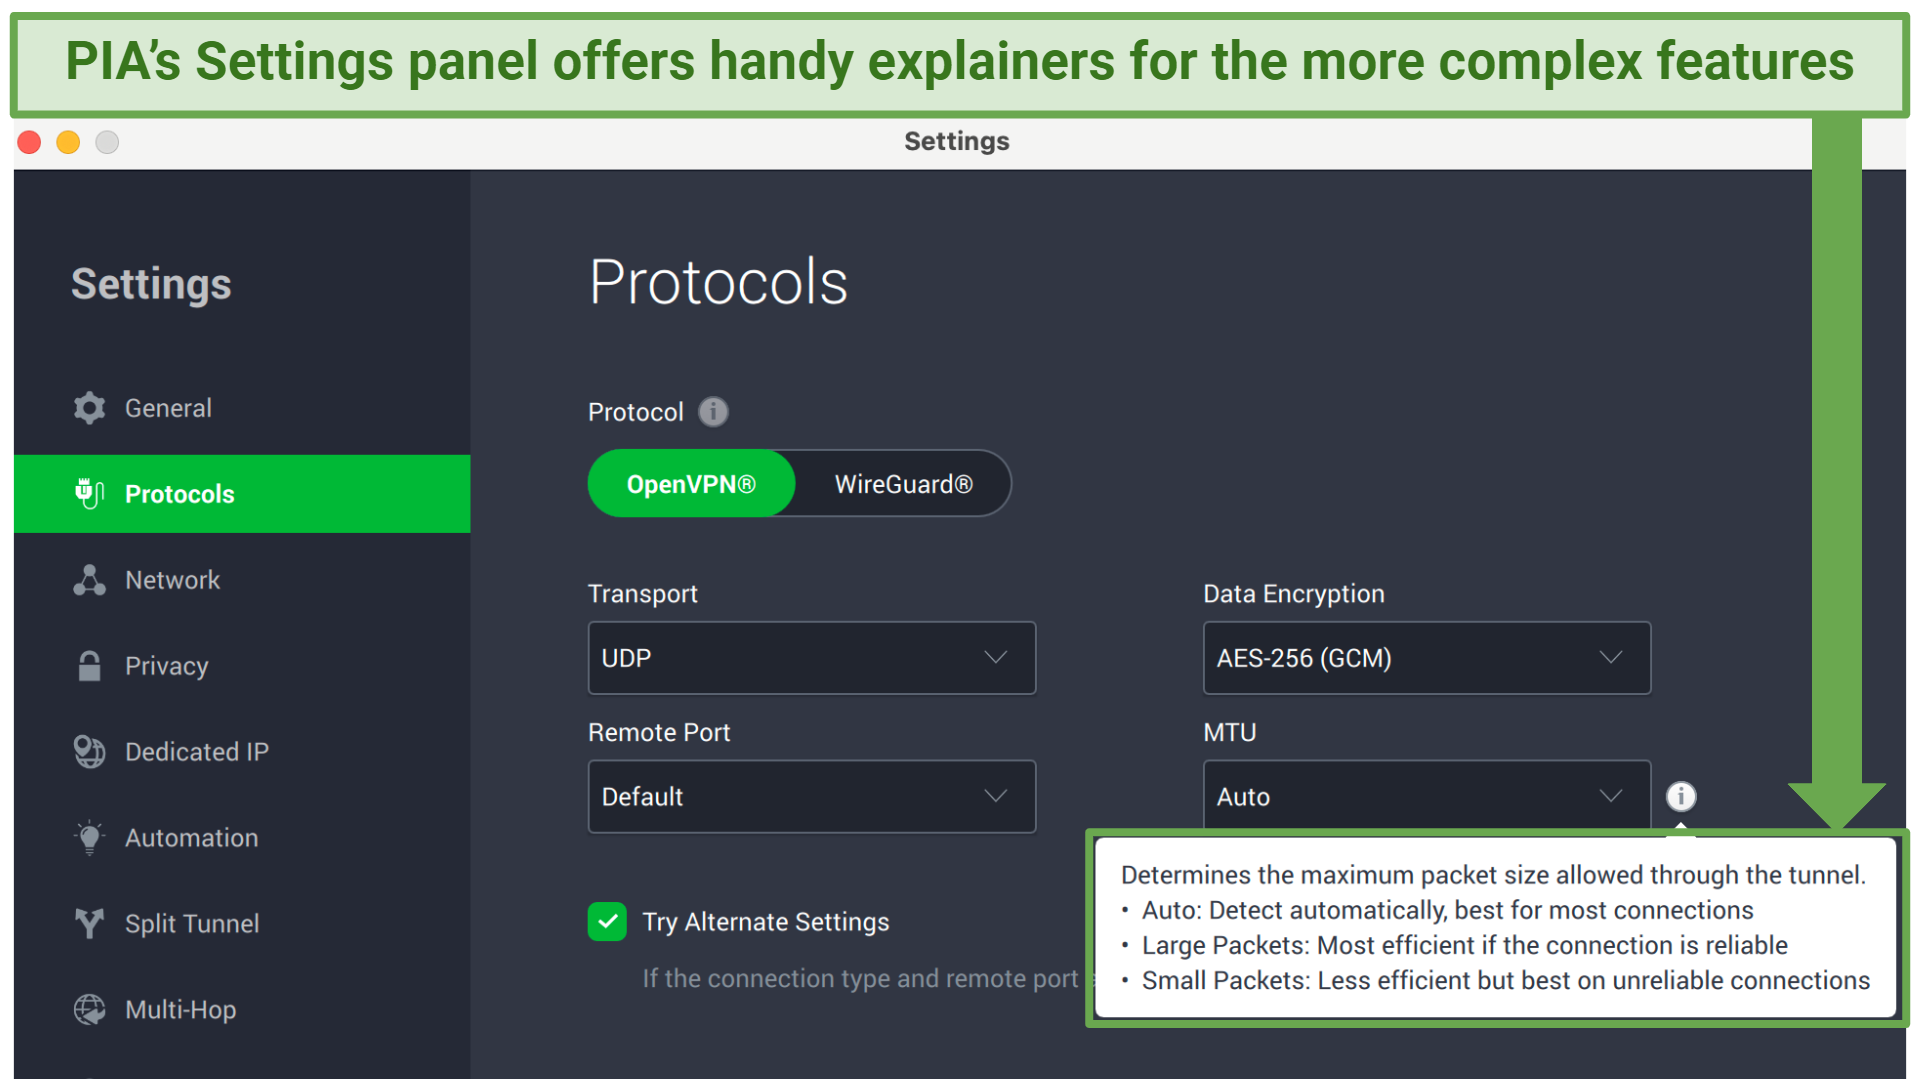 Screenshot showing the PIA Settings menu with handy explainers for complex features